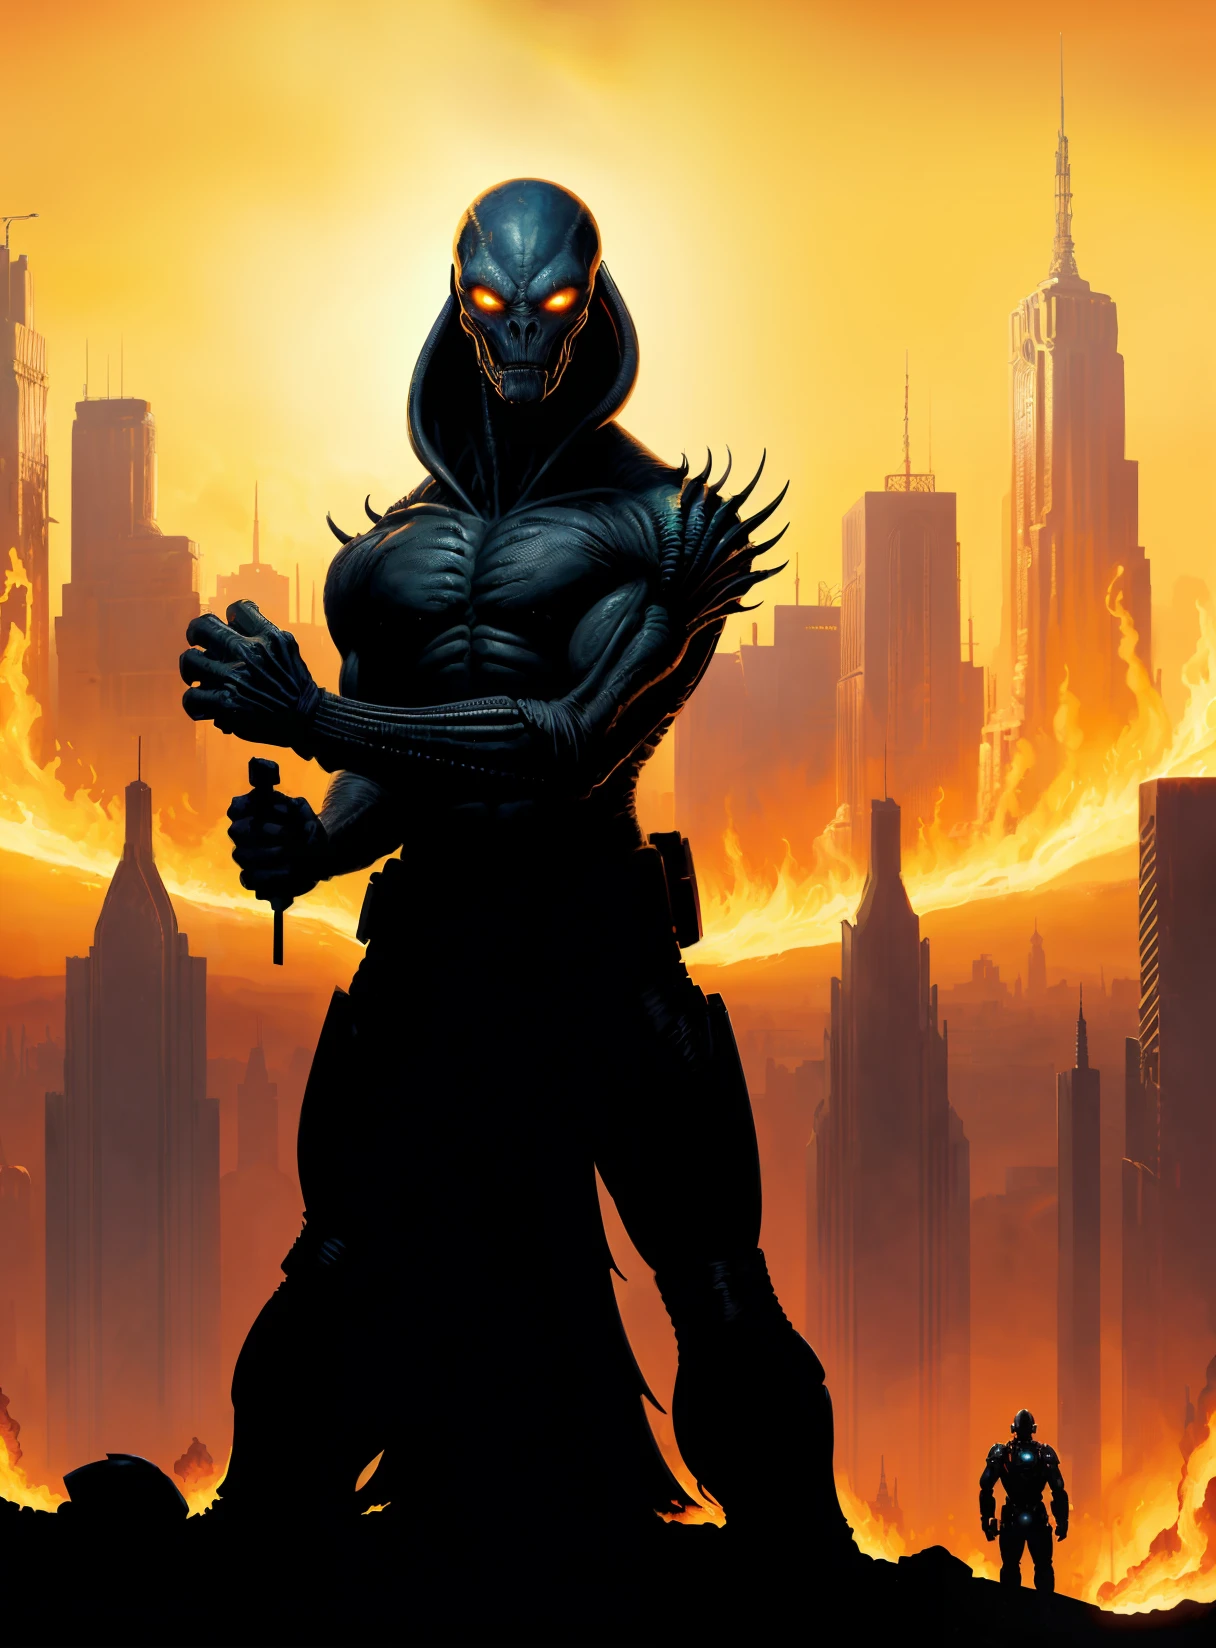 Menacing alien posing in front of a city on fire with orange and red tones